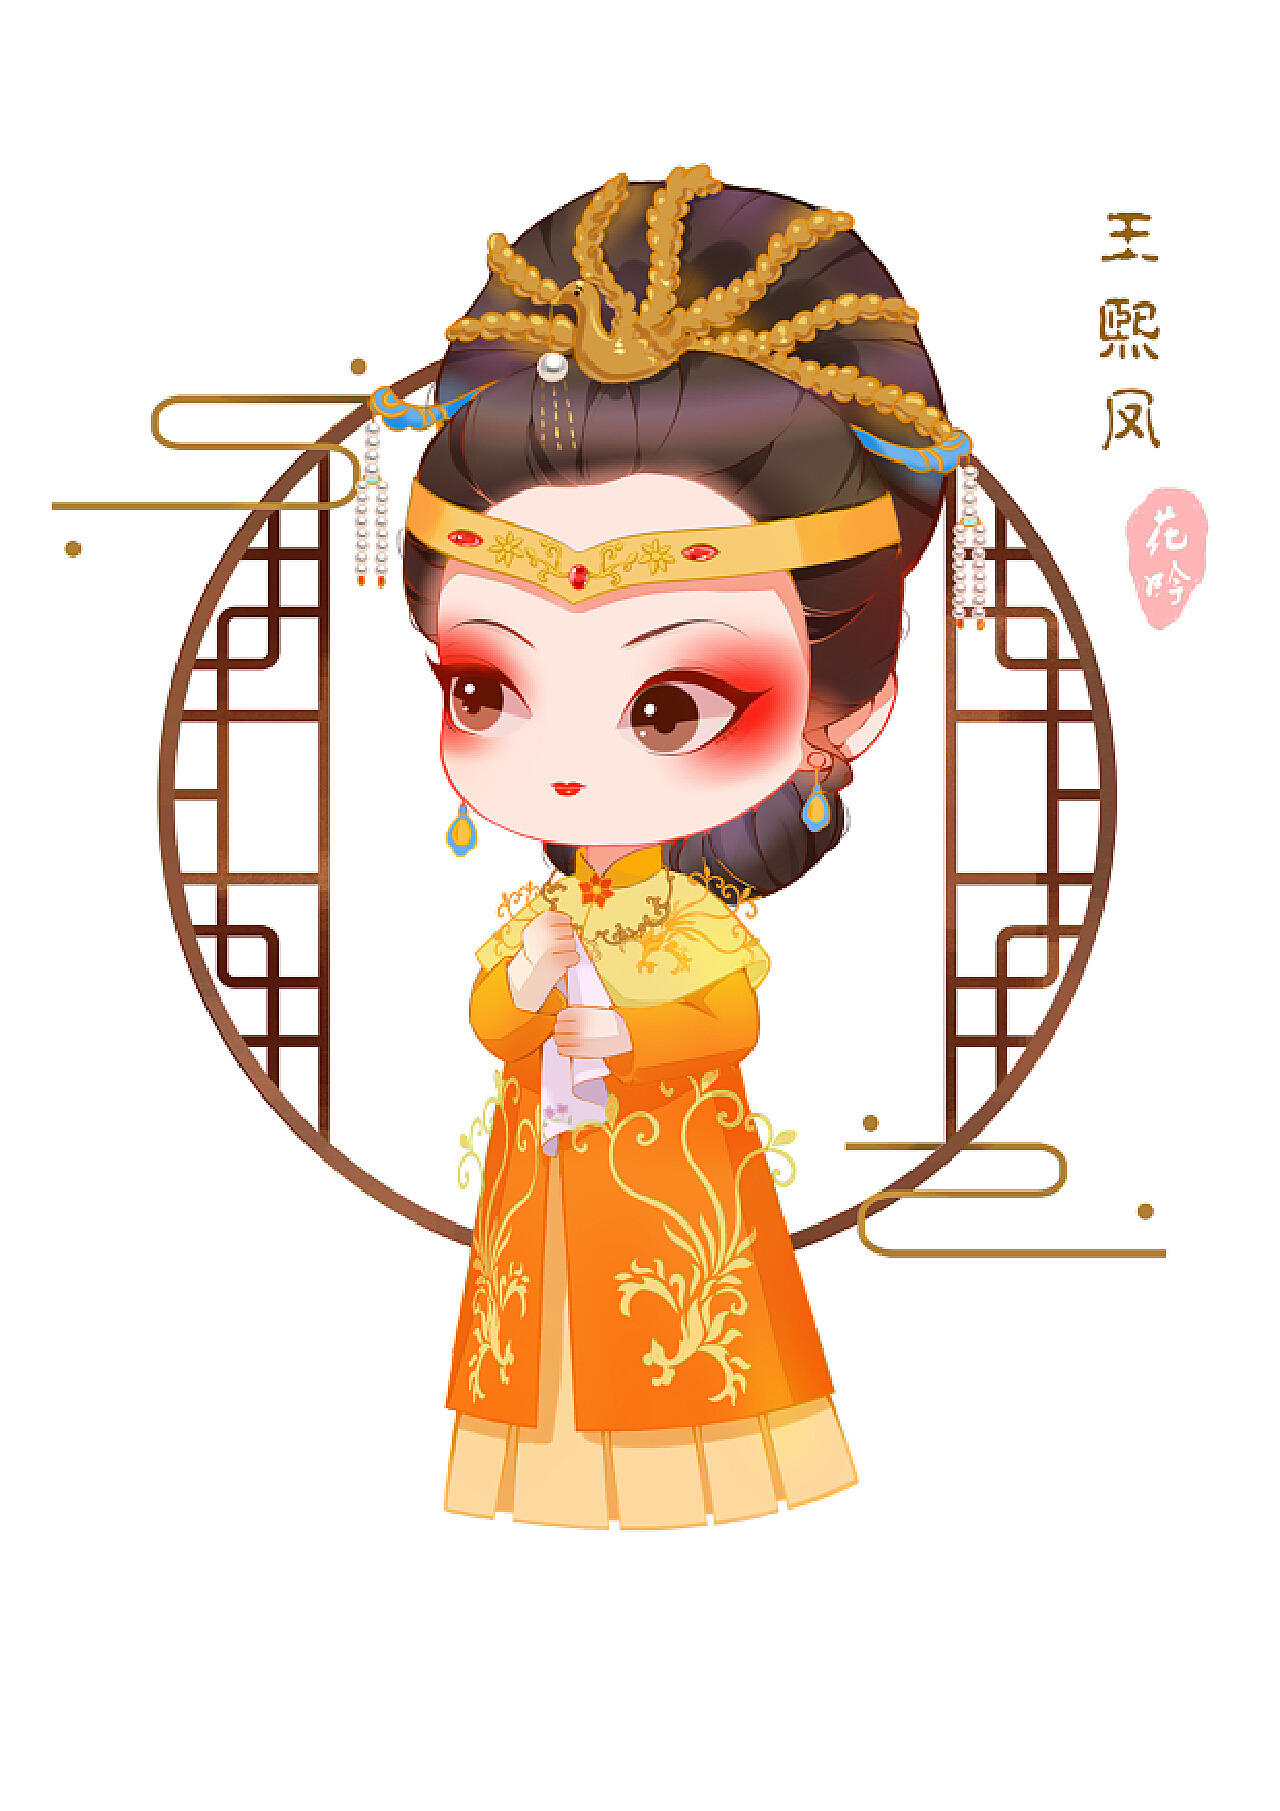 Legendary Song Dynasty queen focus of new online drama - Chinadaily.com.cn